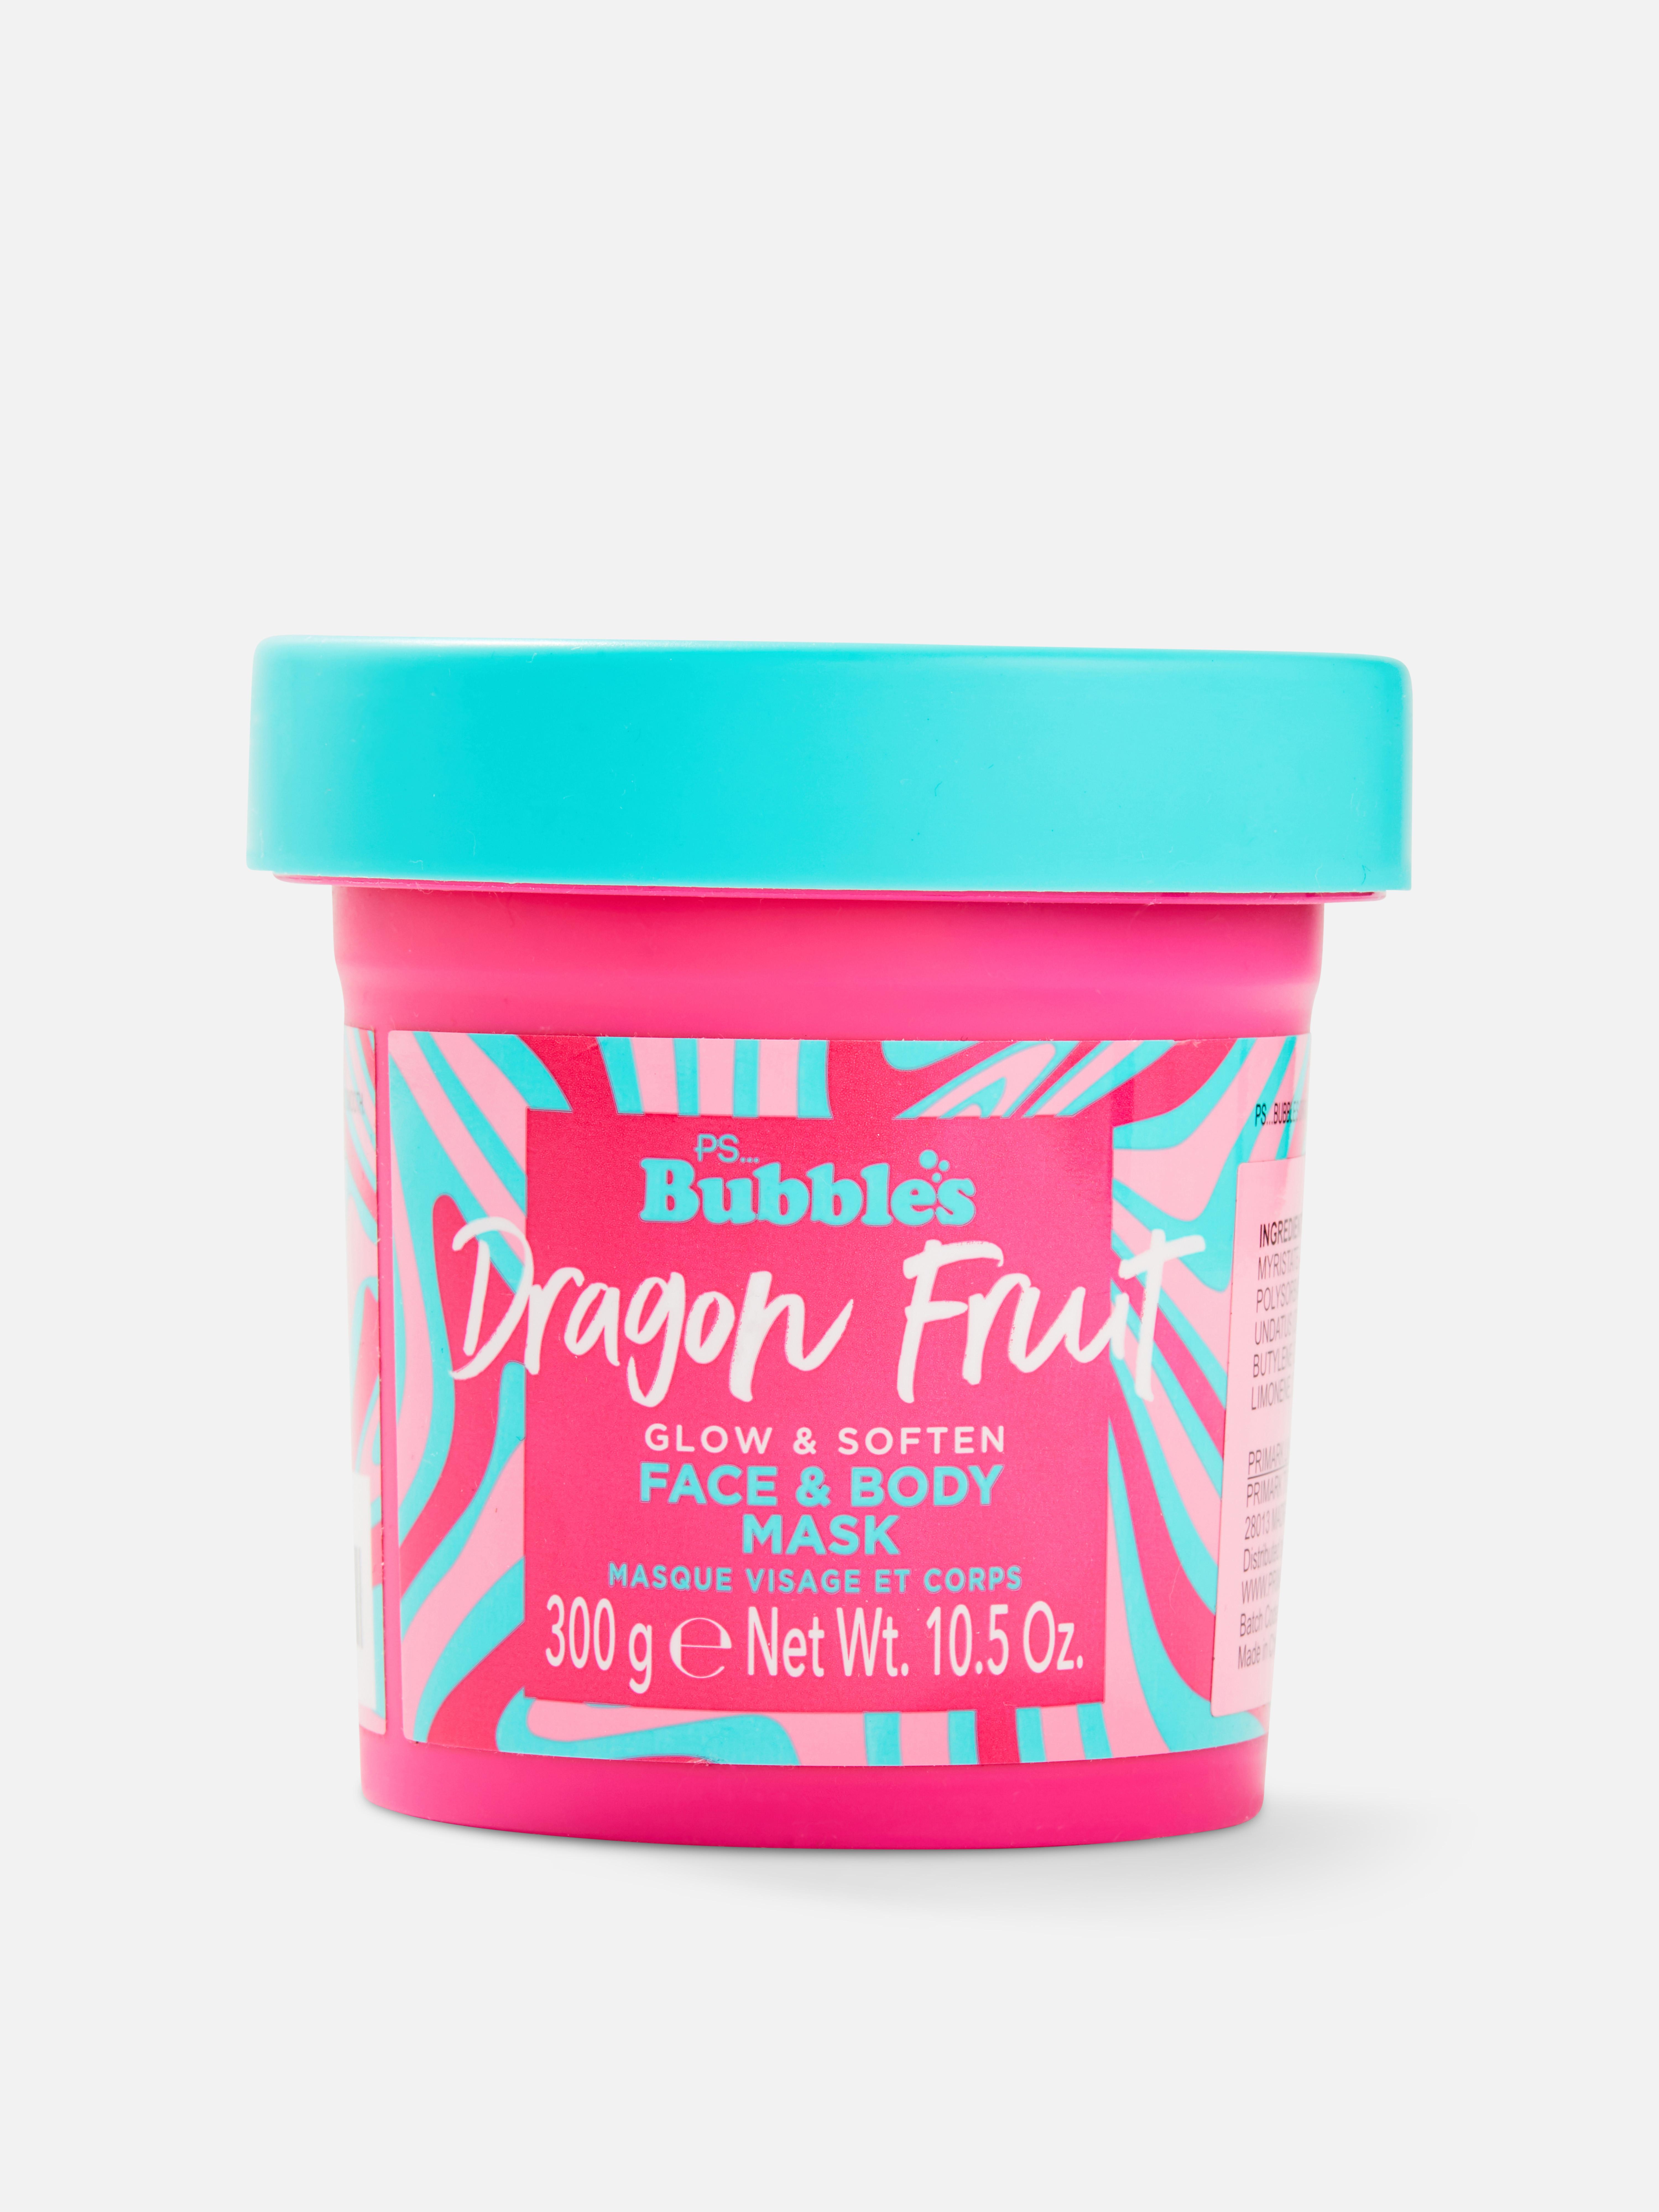 PS… Dragon Fruit Face and Body Mask